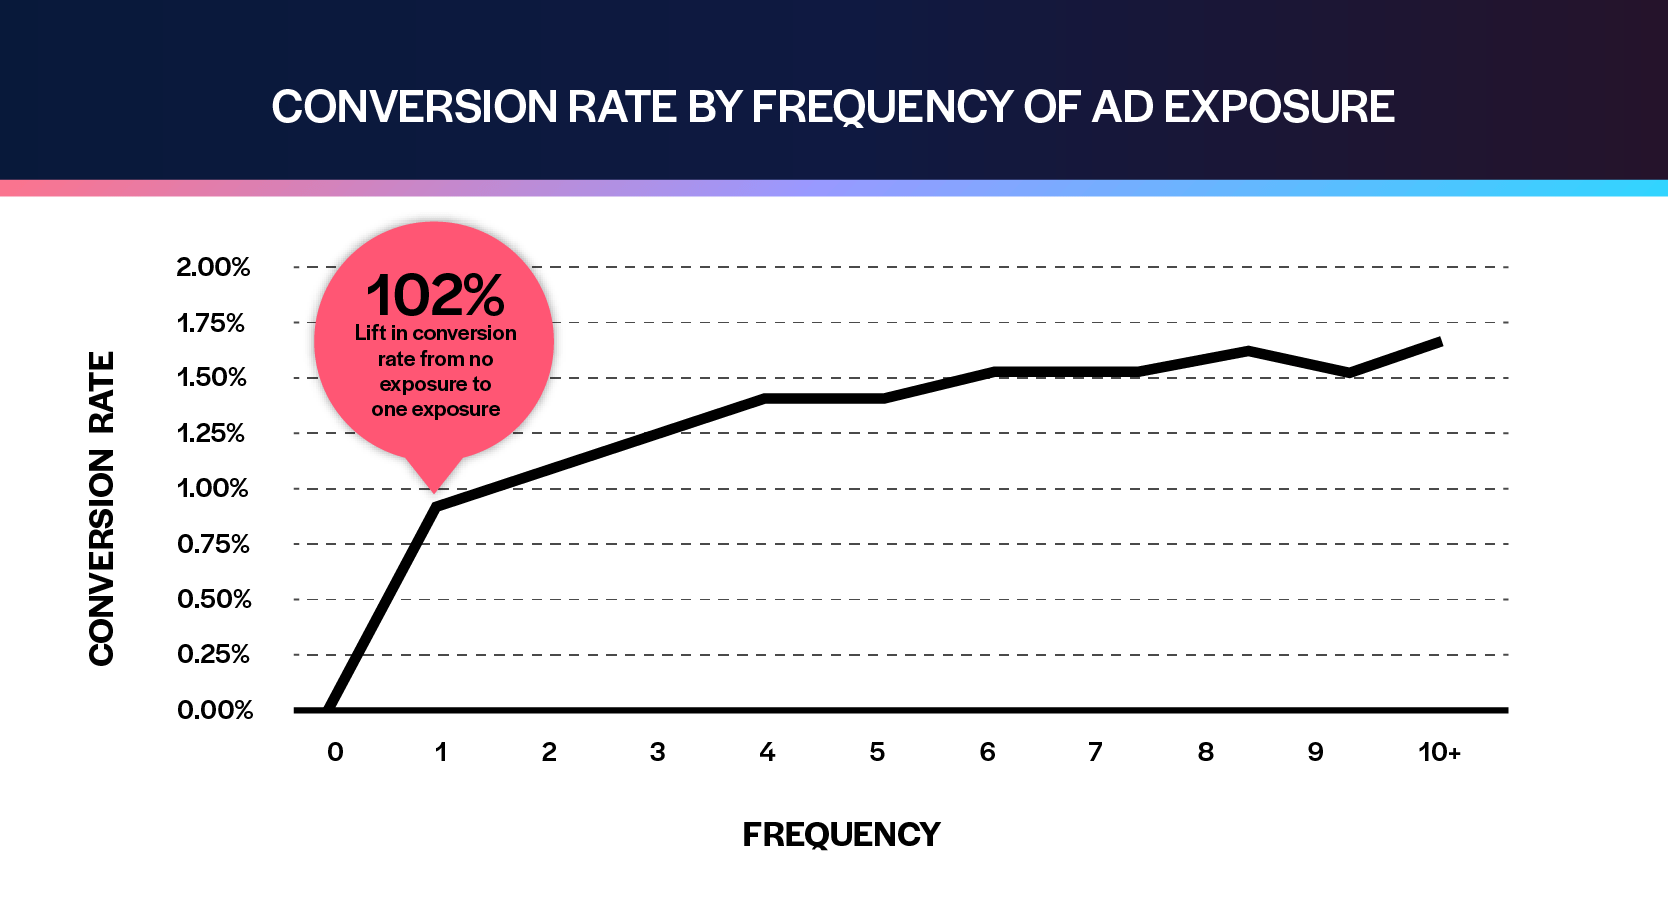 Conversion rate by frequency of ad exposure